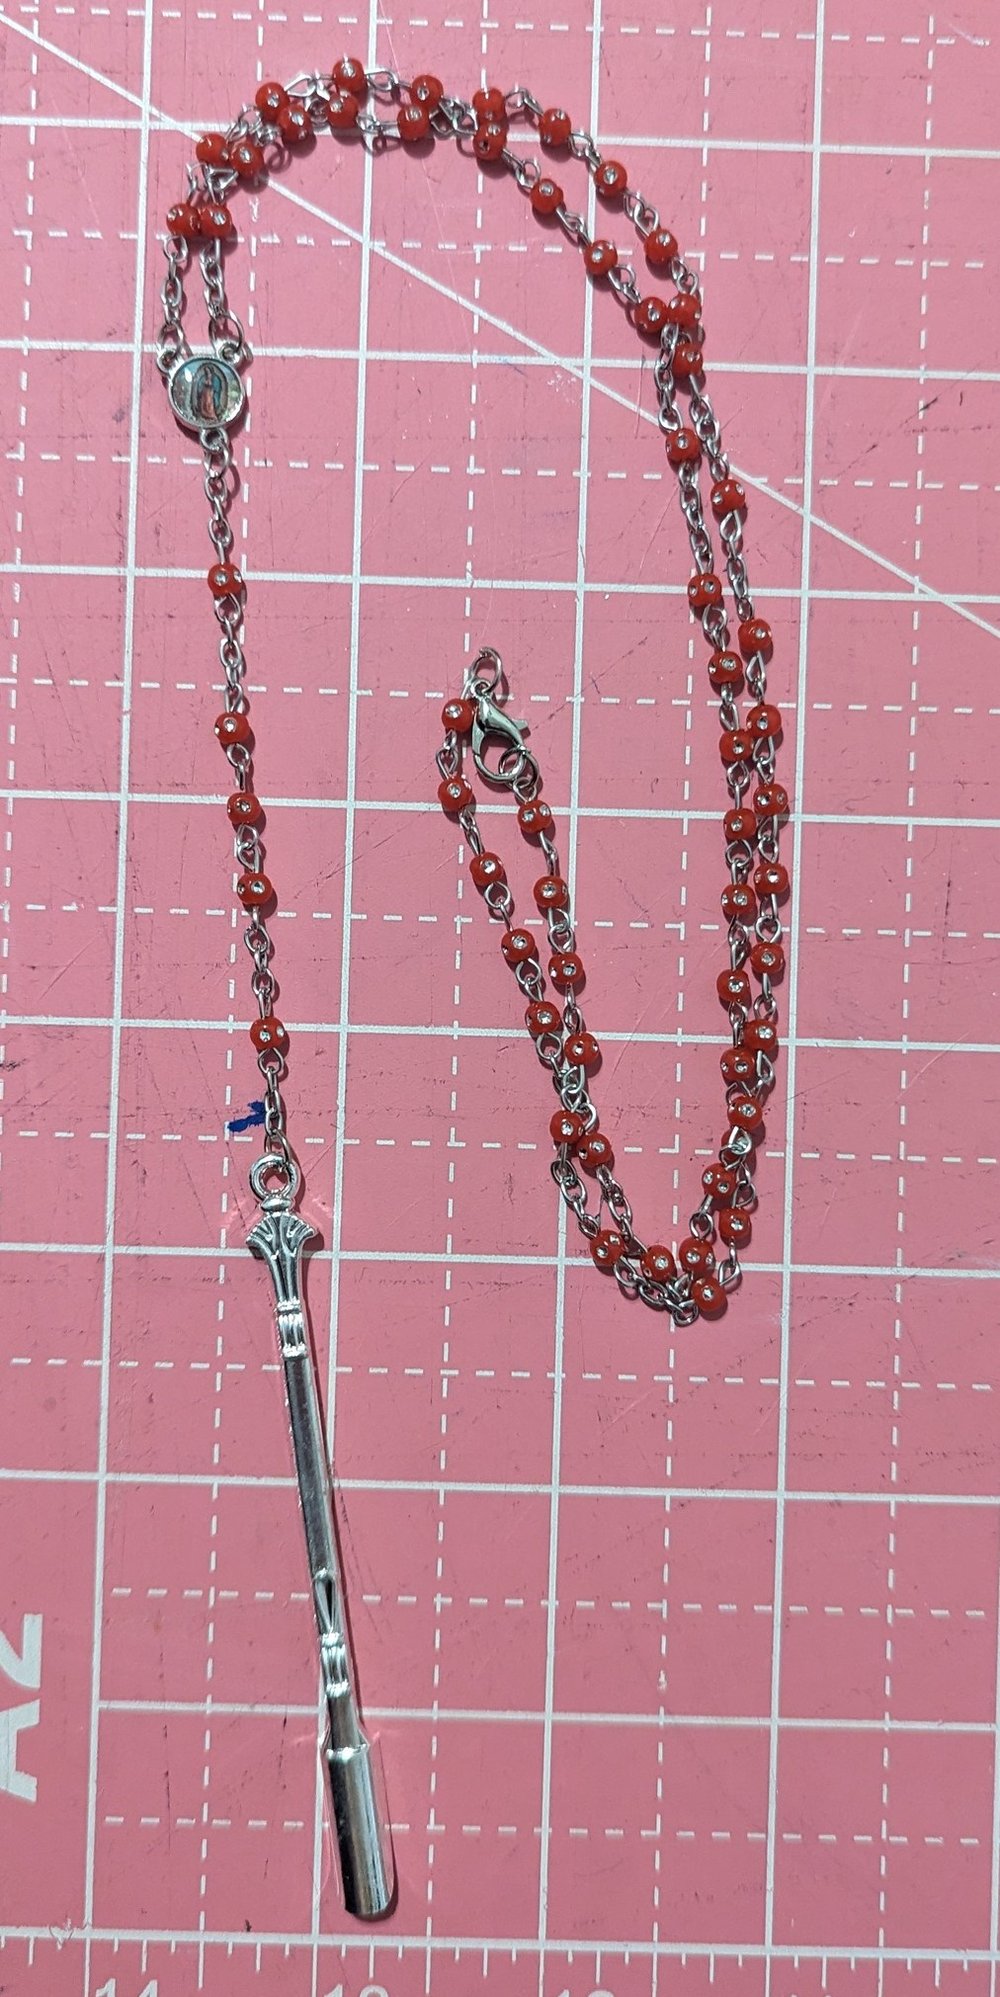 Lil spoon rosary 